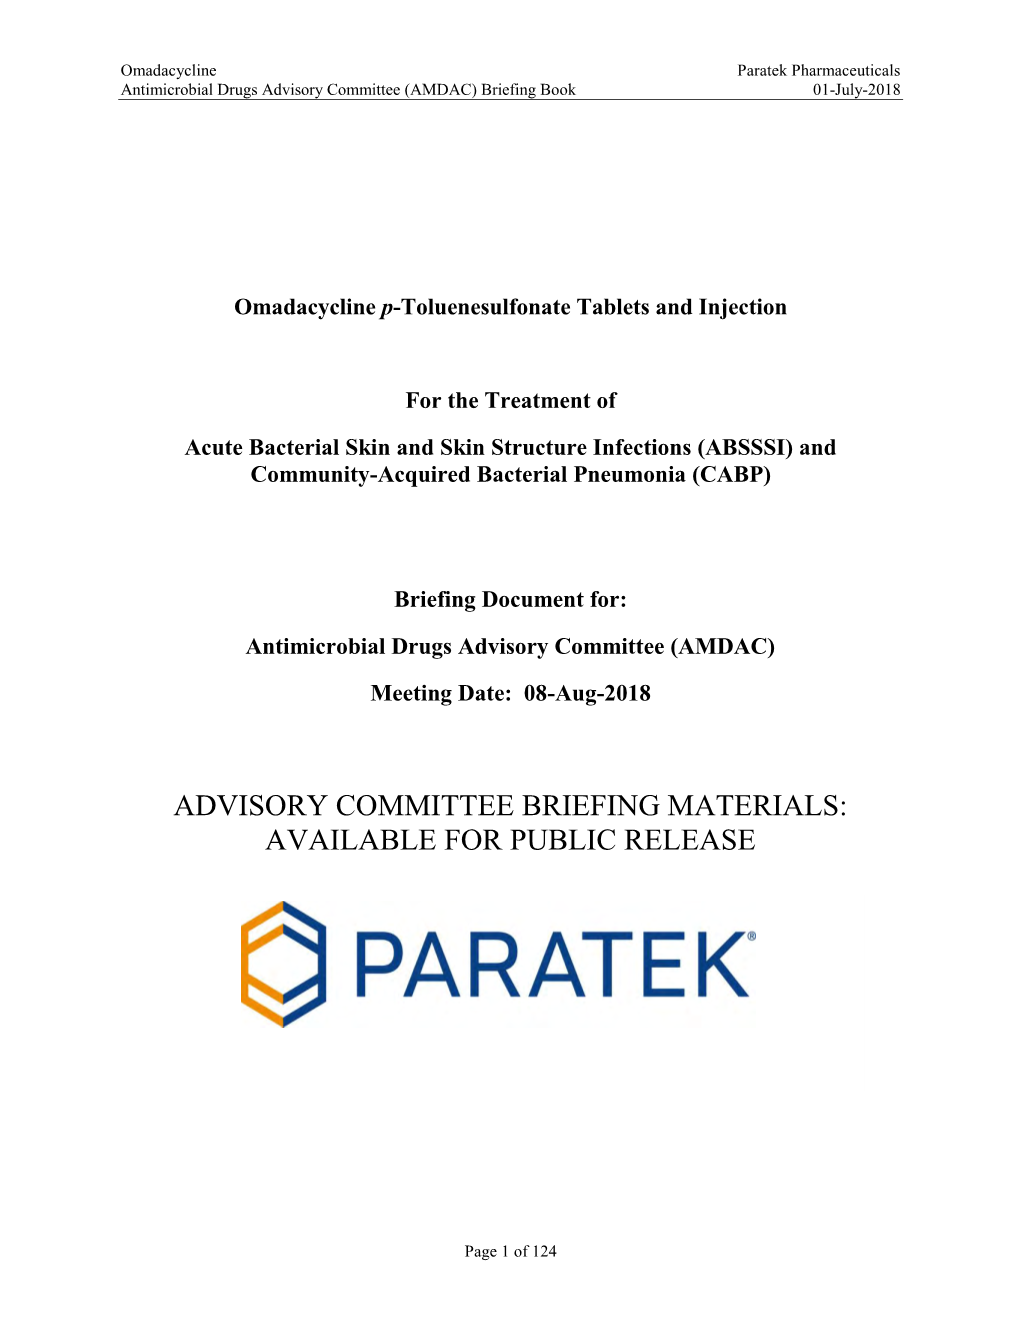 Advisory Committee Briefing Materials: Available for Public Release